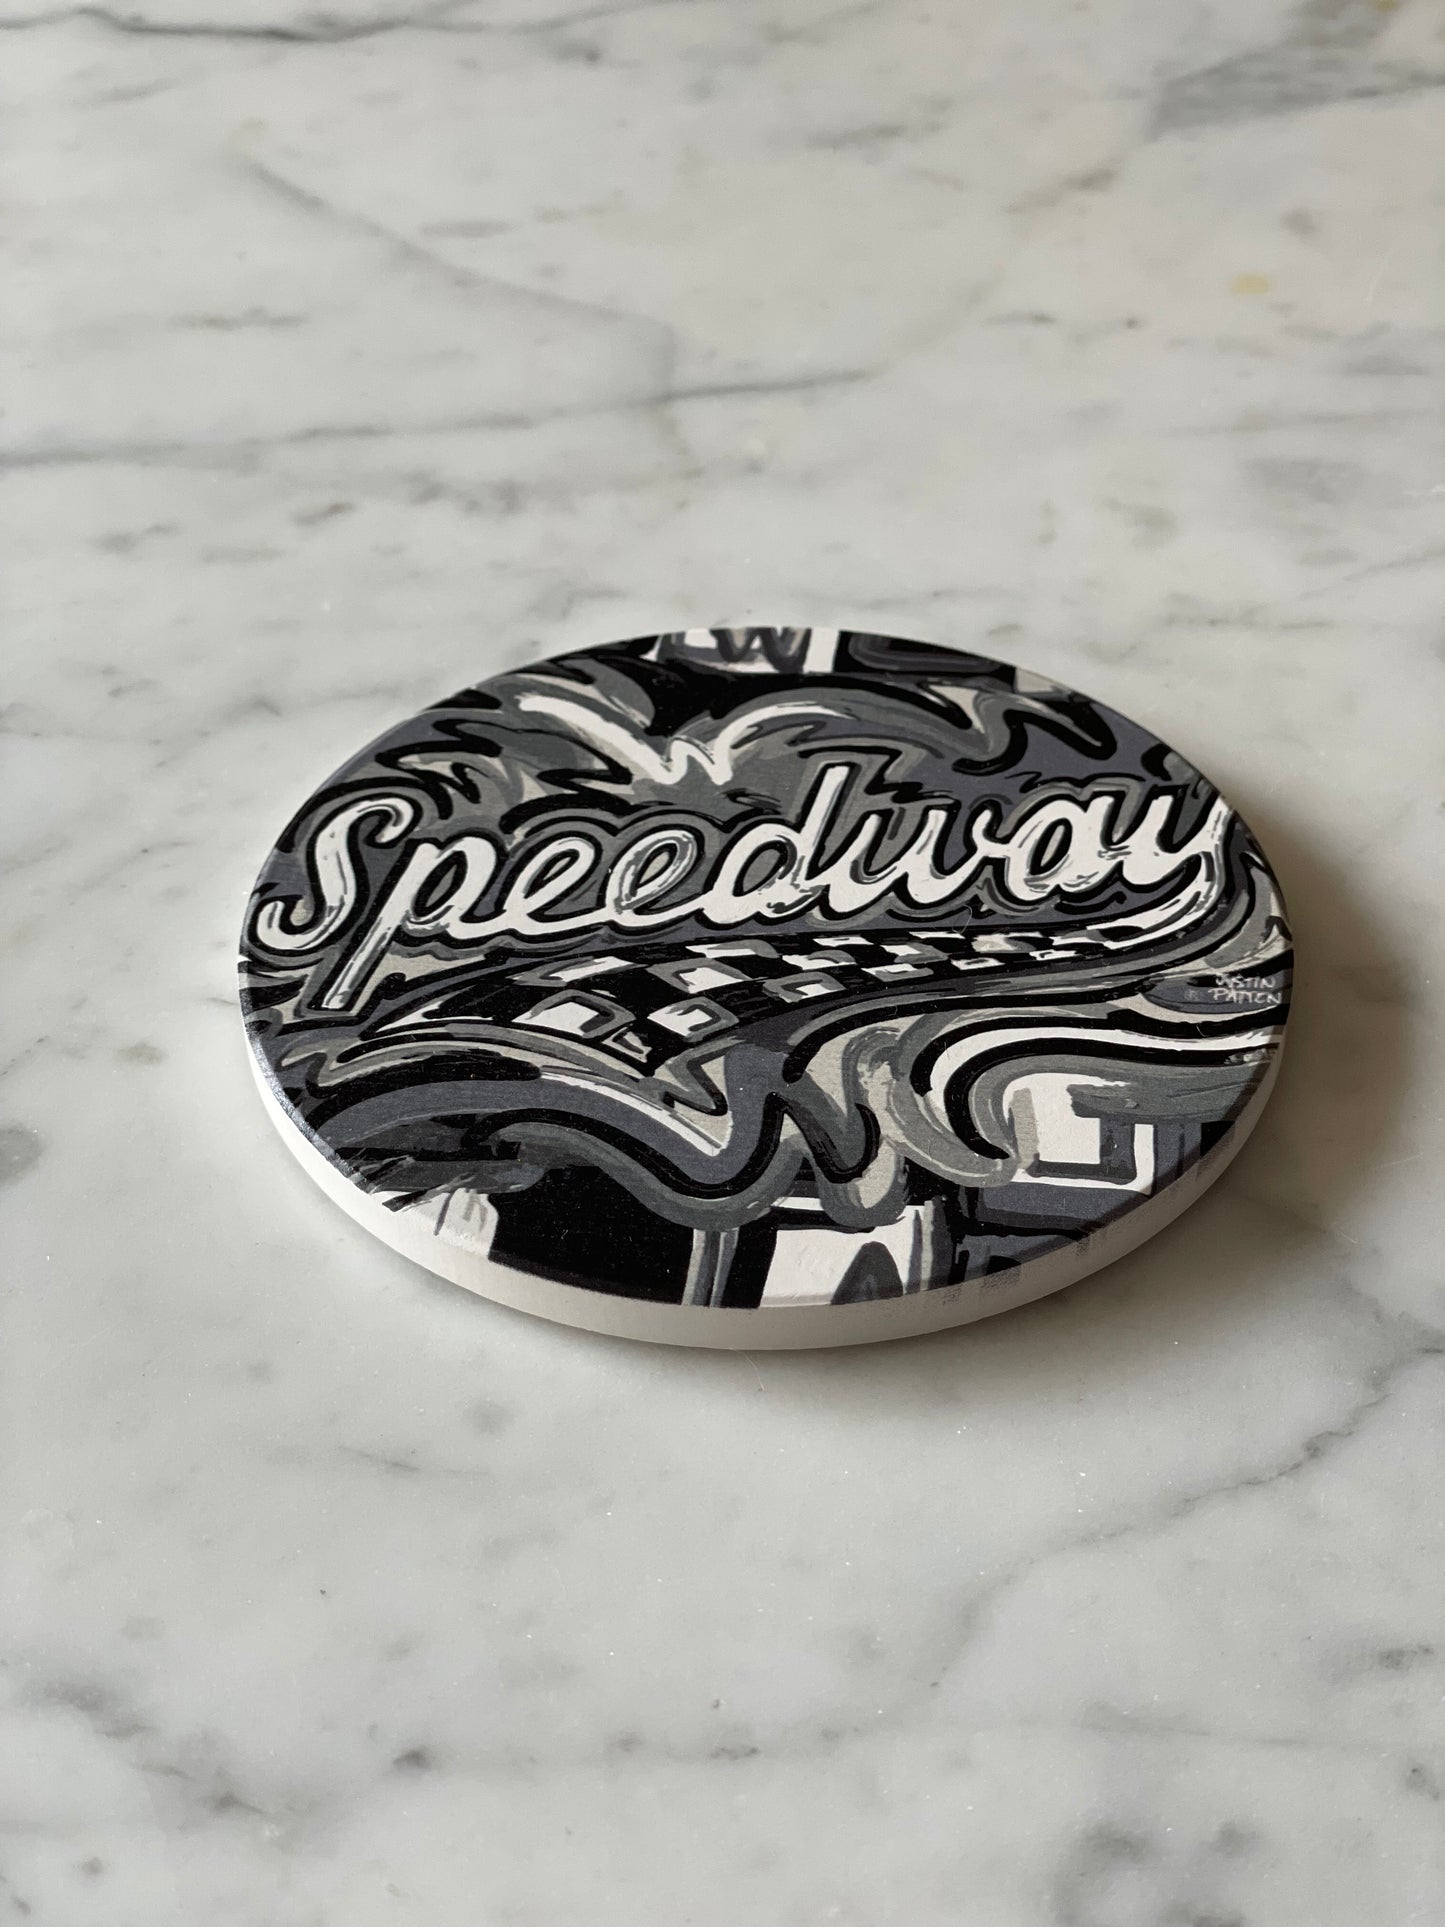 Speedway Indiana Stone Coaster by Justin Patten